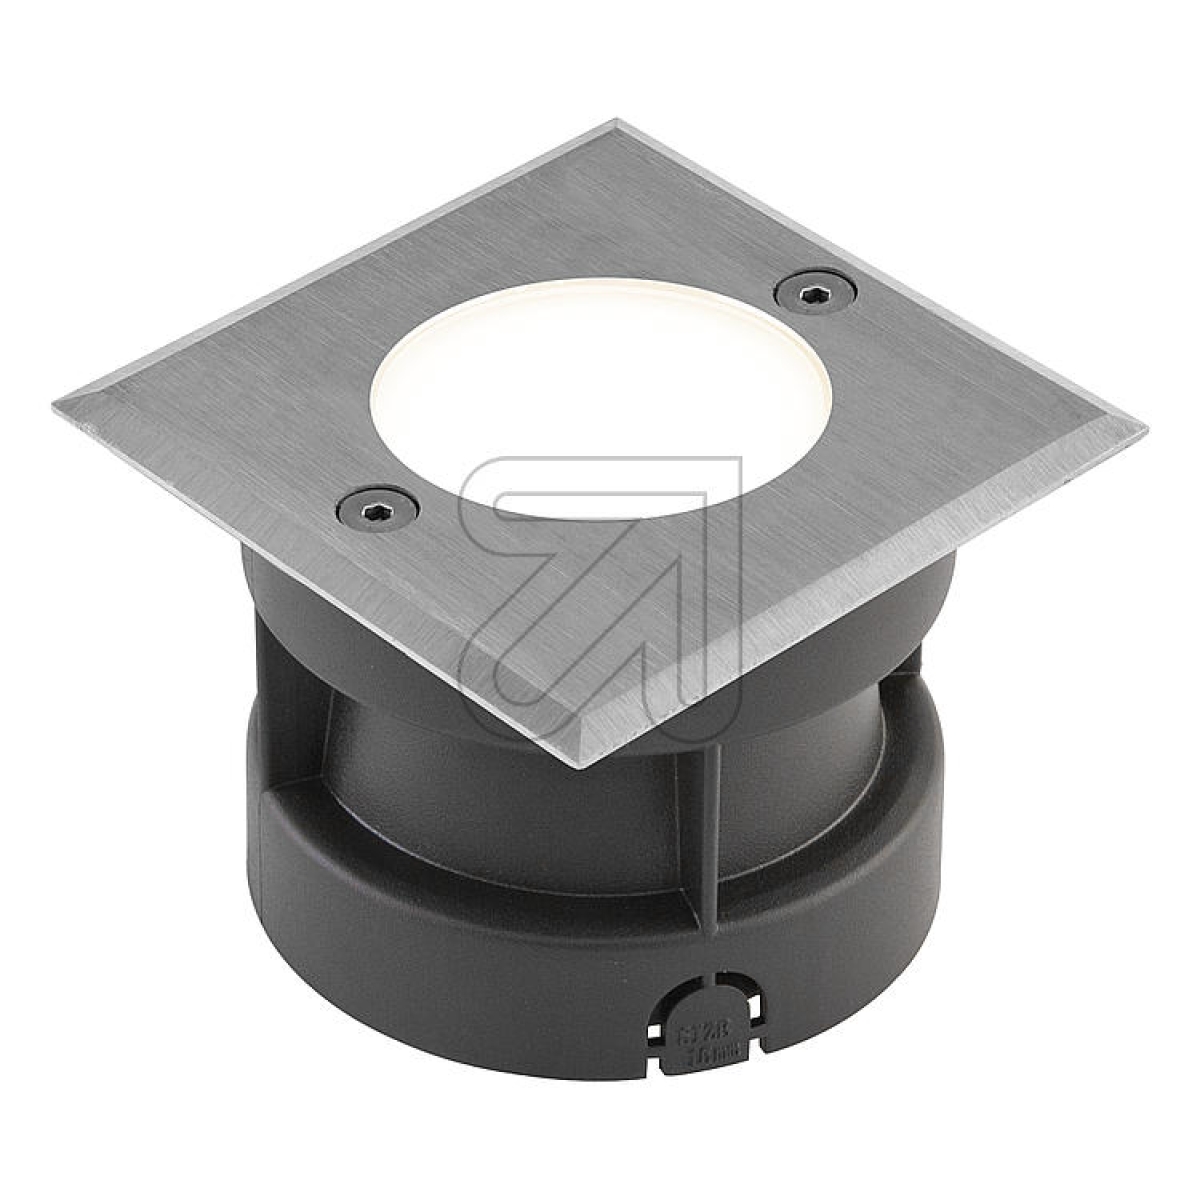 EVNLED recessed floor light square stainless steel IP67 4000K 2.5W 6742540Article-No: 627835